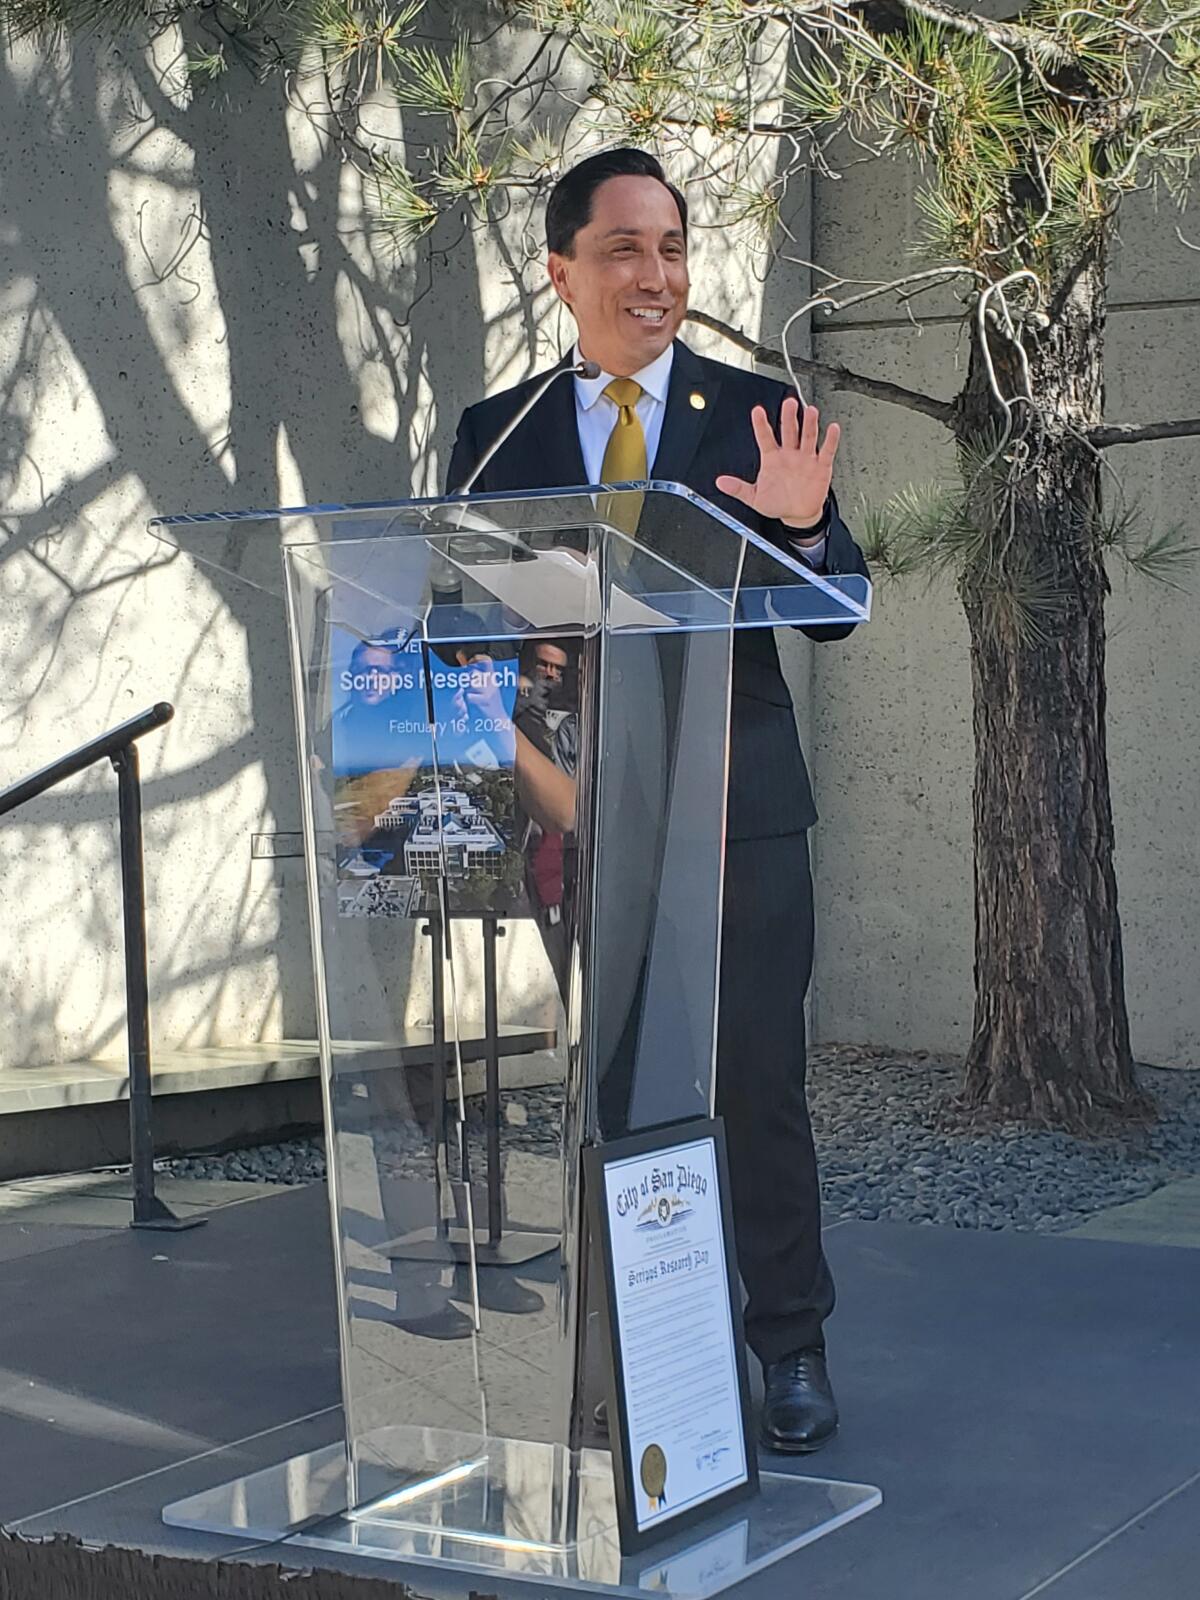 San Diego Mayor Todd Gloria speaks at Scripps Research on Feb. 15, which he proclaimed "Scripps Research Day" in the city.